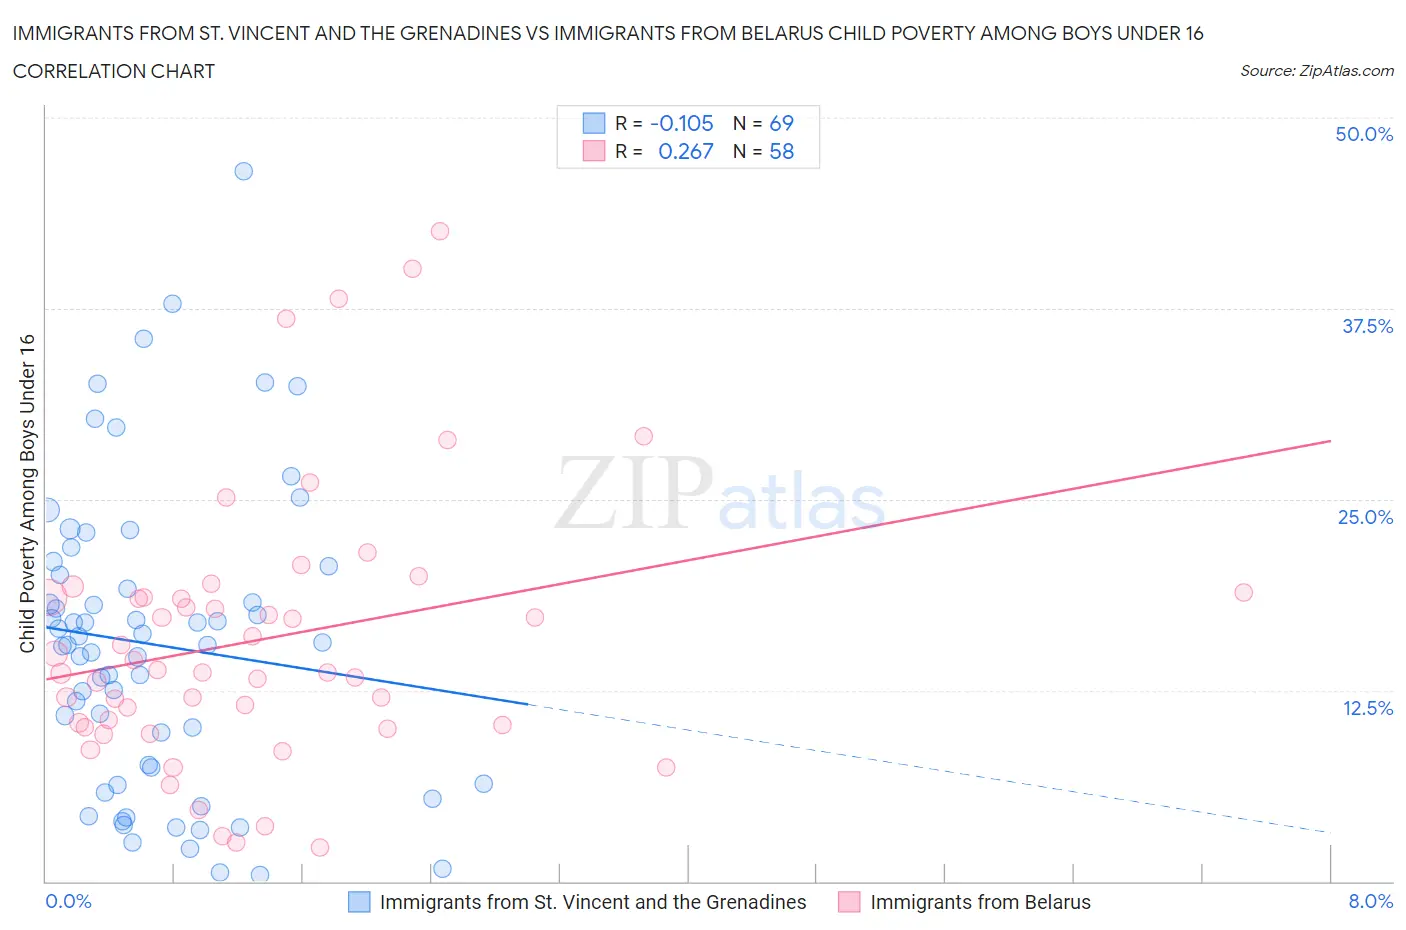 Immigrants from St. Vincent and the Grenadines vs Immigrants from Belarus Child Poverty Among Boys Under 16